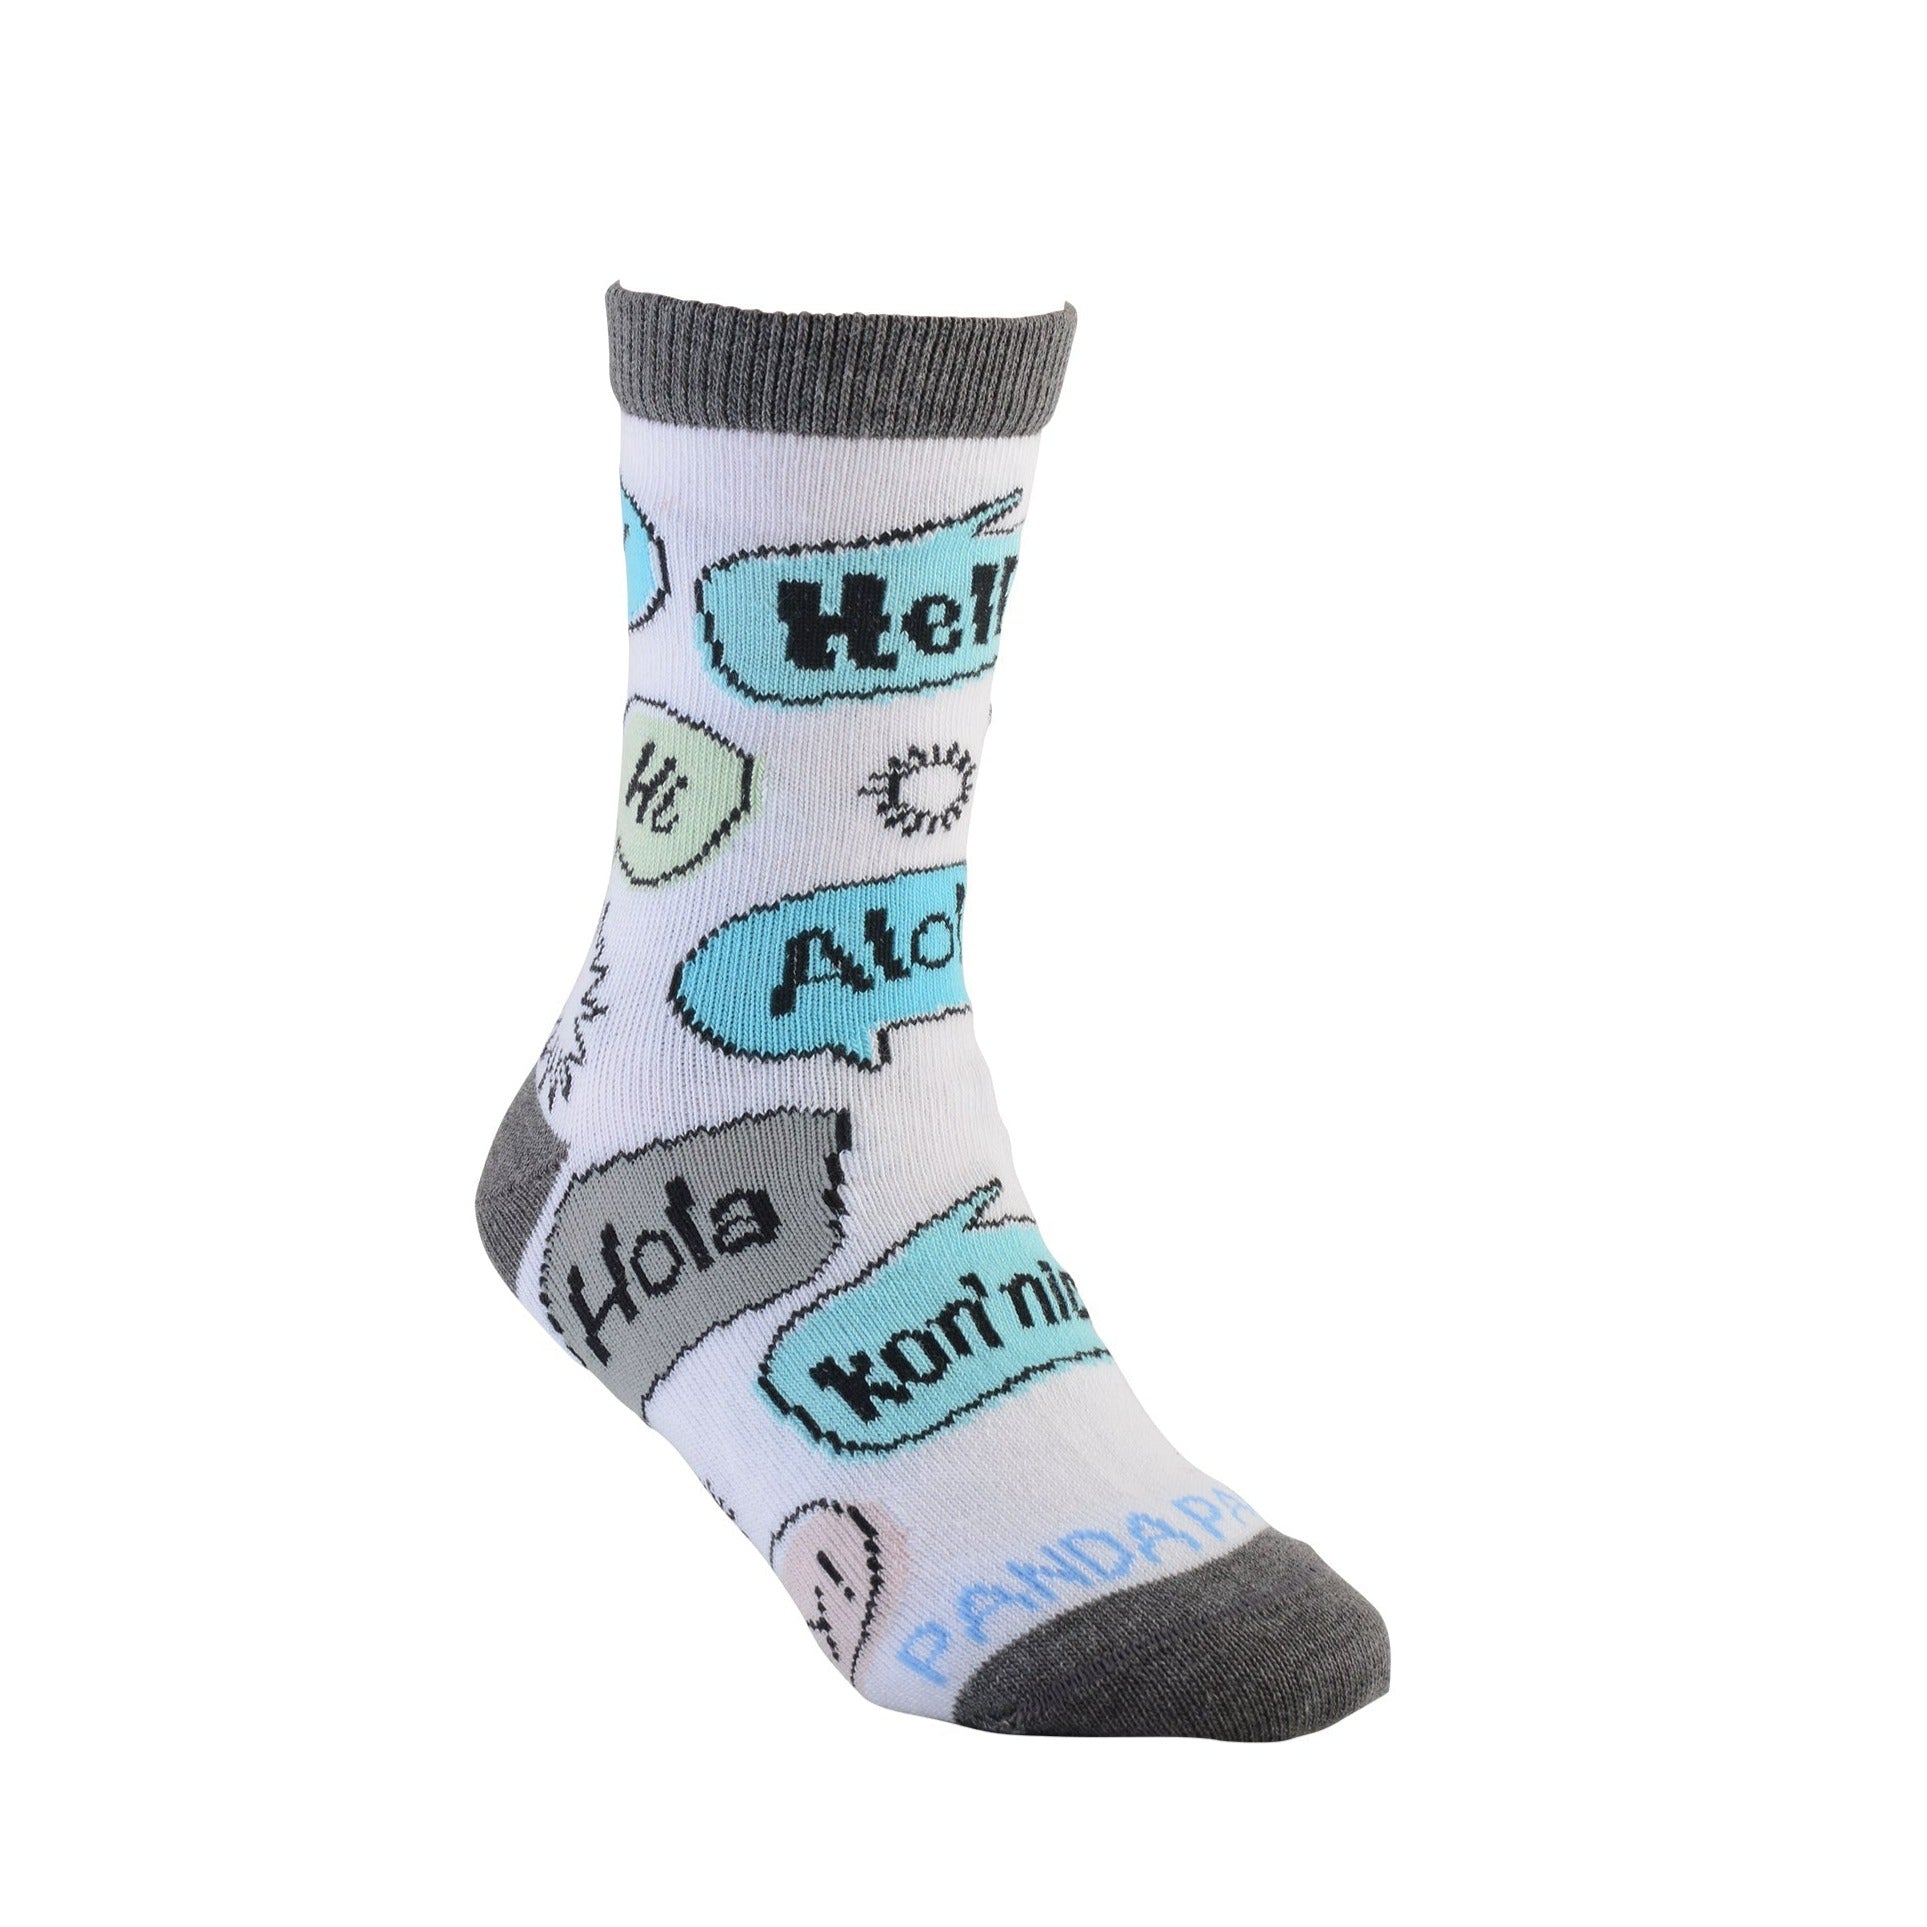 Languages of the World Socks (How to say 